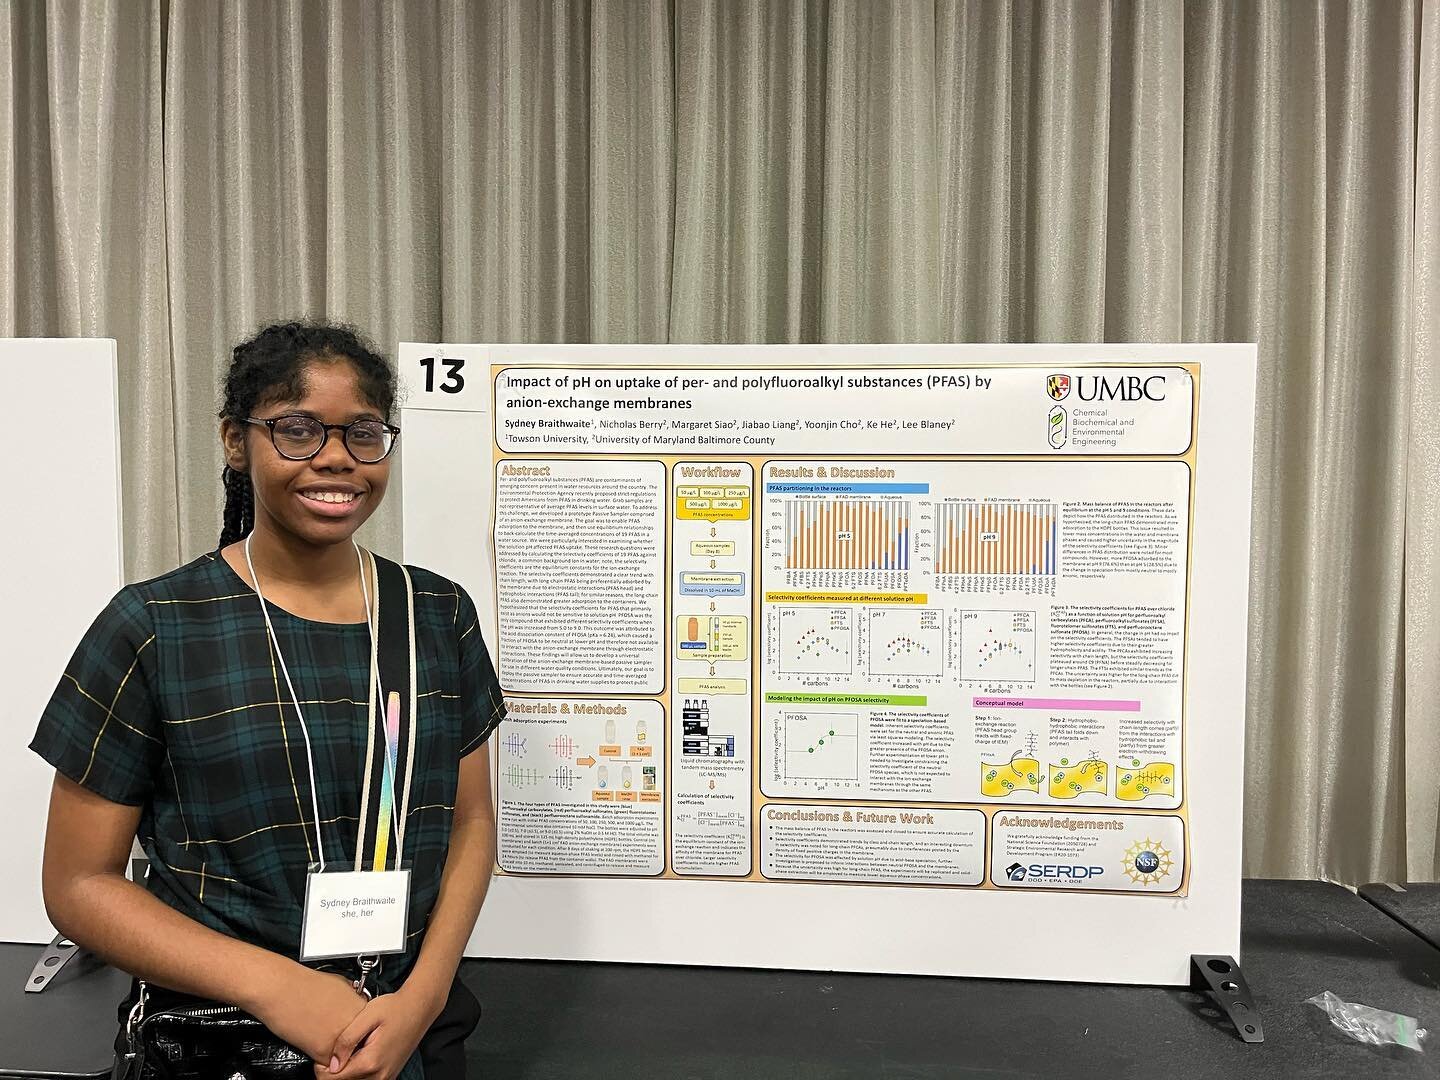 We are so proud of our REU students who visited us this summer! Sydney Braithwaite presented her research from the summer at UMBC&rsquo;s SURF.

Great work!! 👏🧪

#womeninstem #undergradresearch